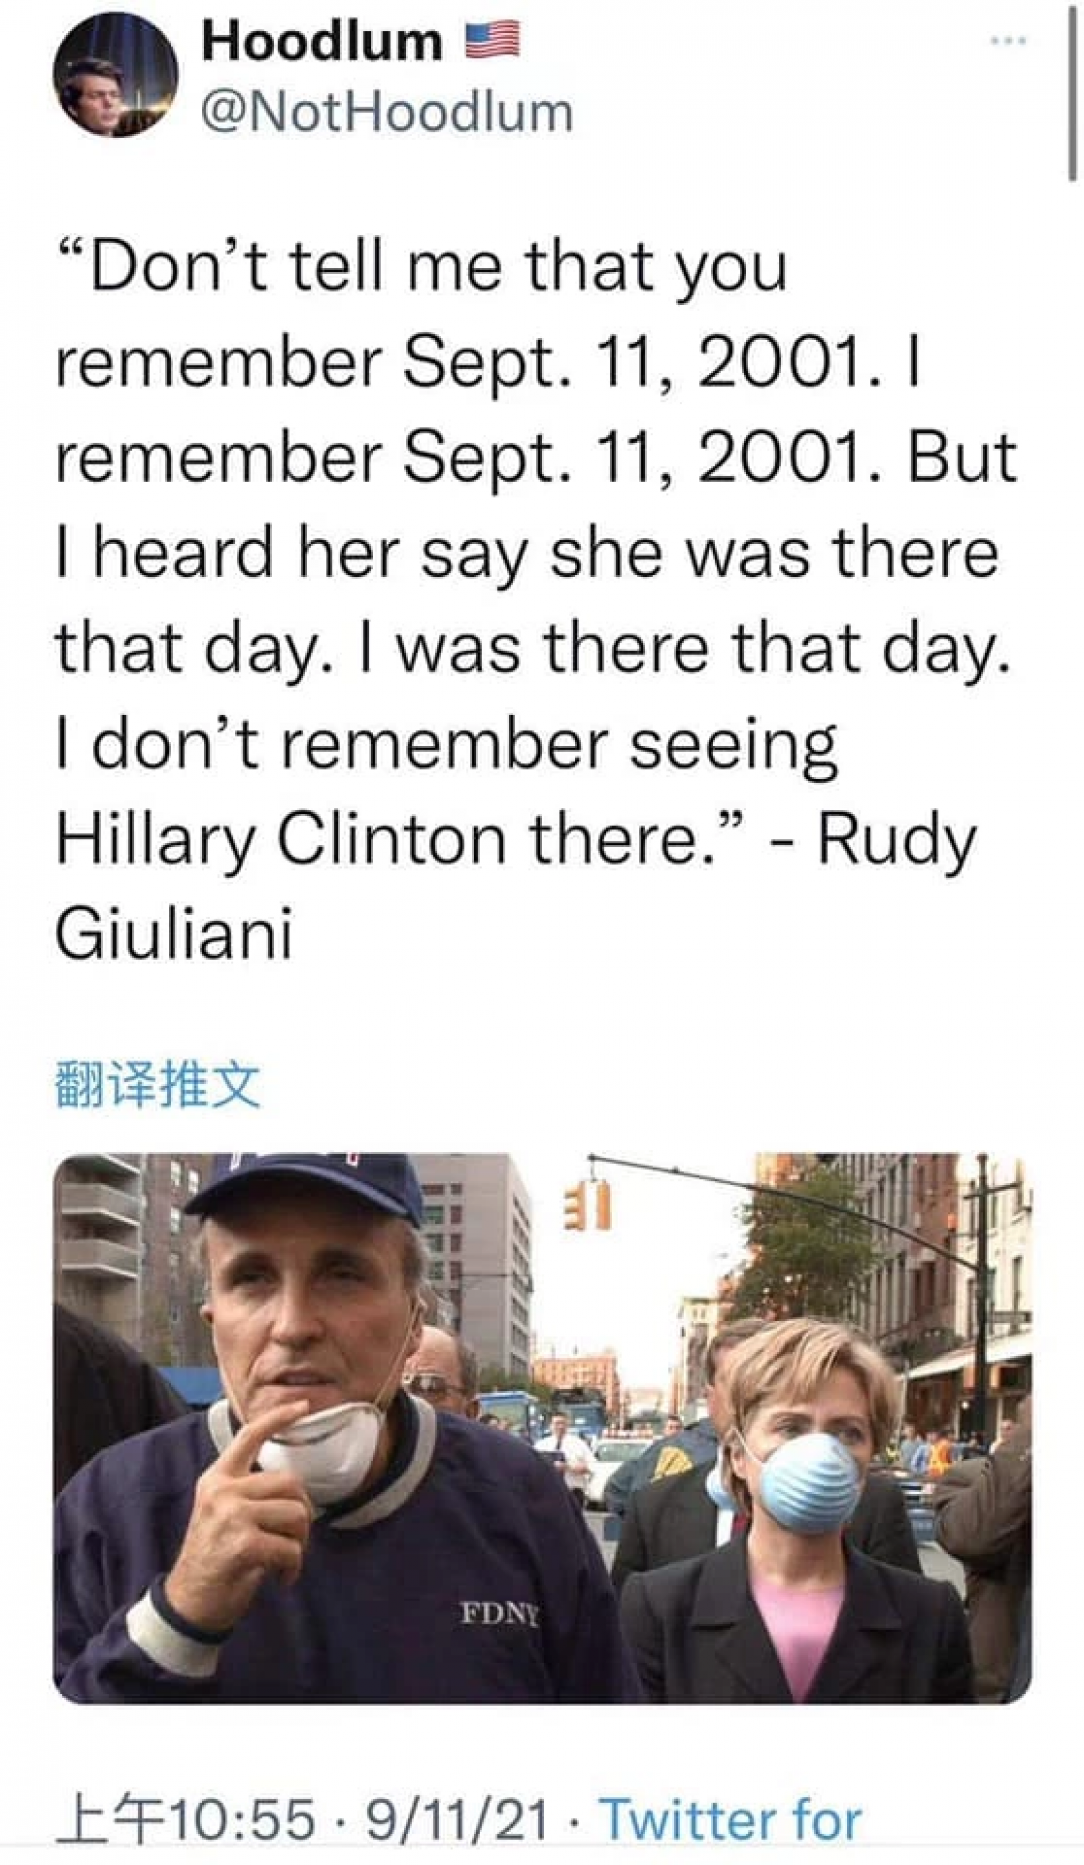 We have to remember Rudy has been a very heavy drinker for quite a while now